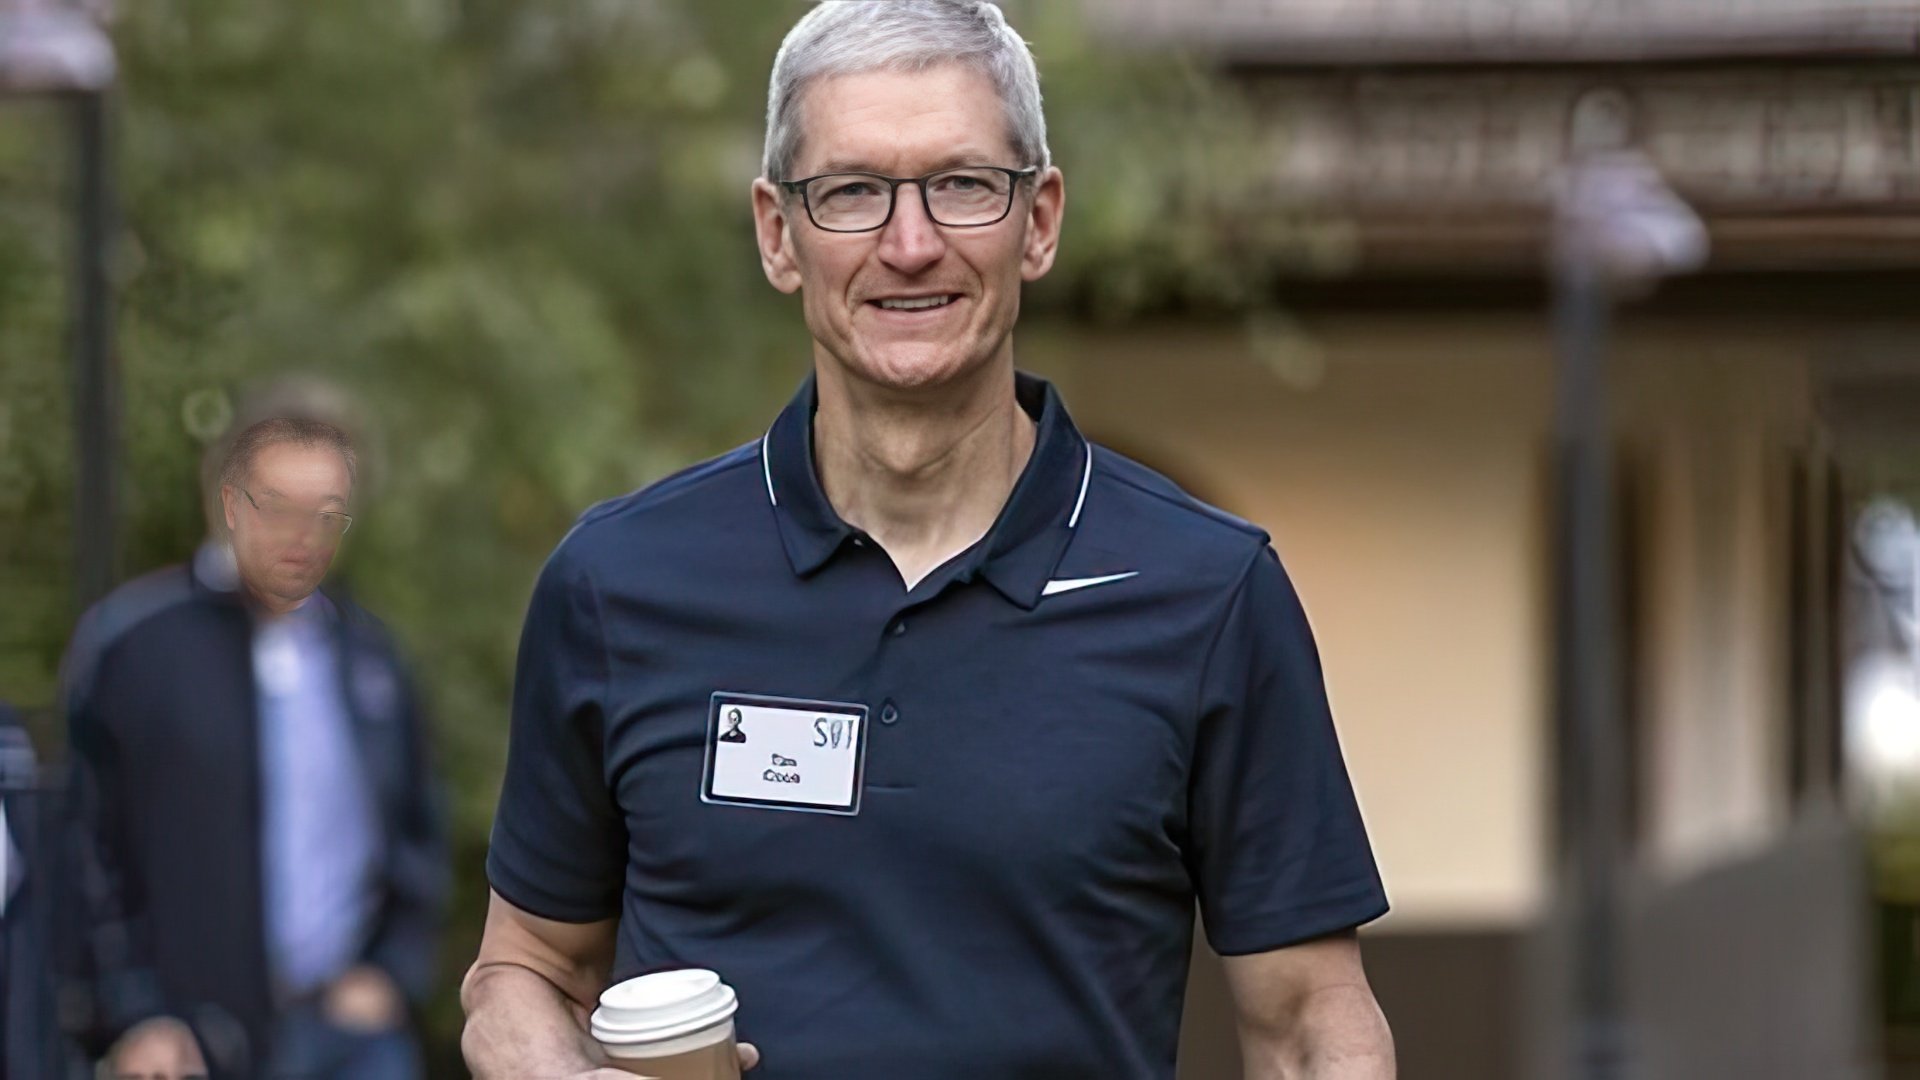 Tim Cook does not hide his sexual orientation